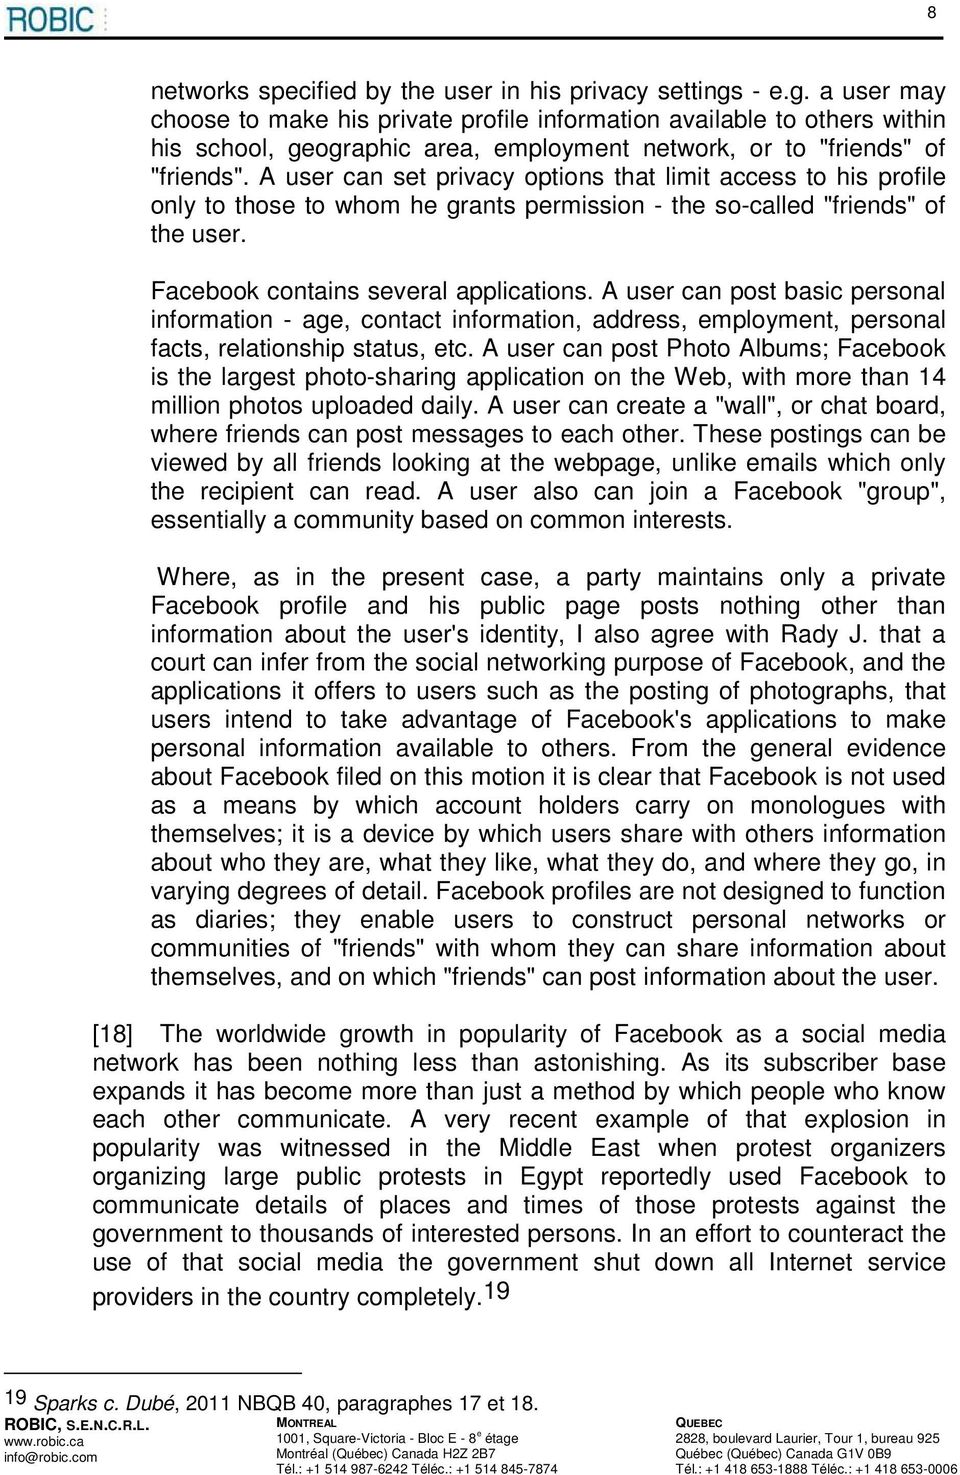 A user can set privacy options that limit access to his profile only to those to whom he grants permission - the so-called "friends" of the user. Facebook contains several applications.